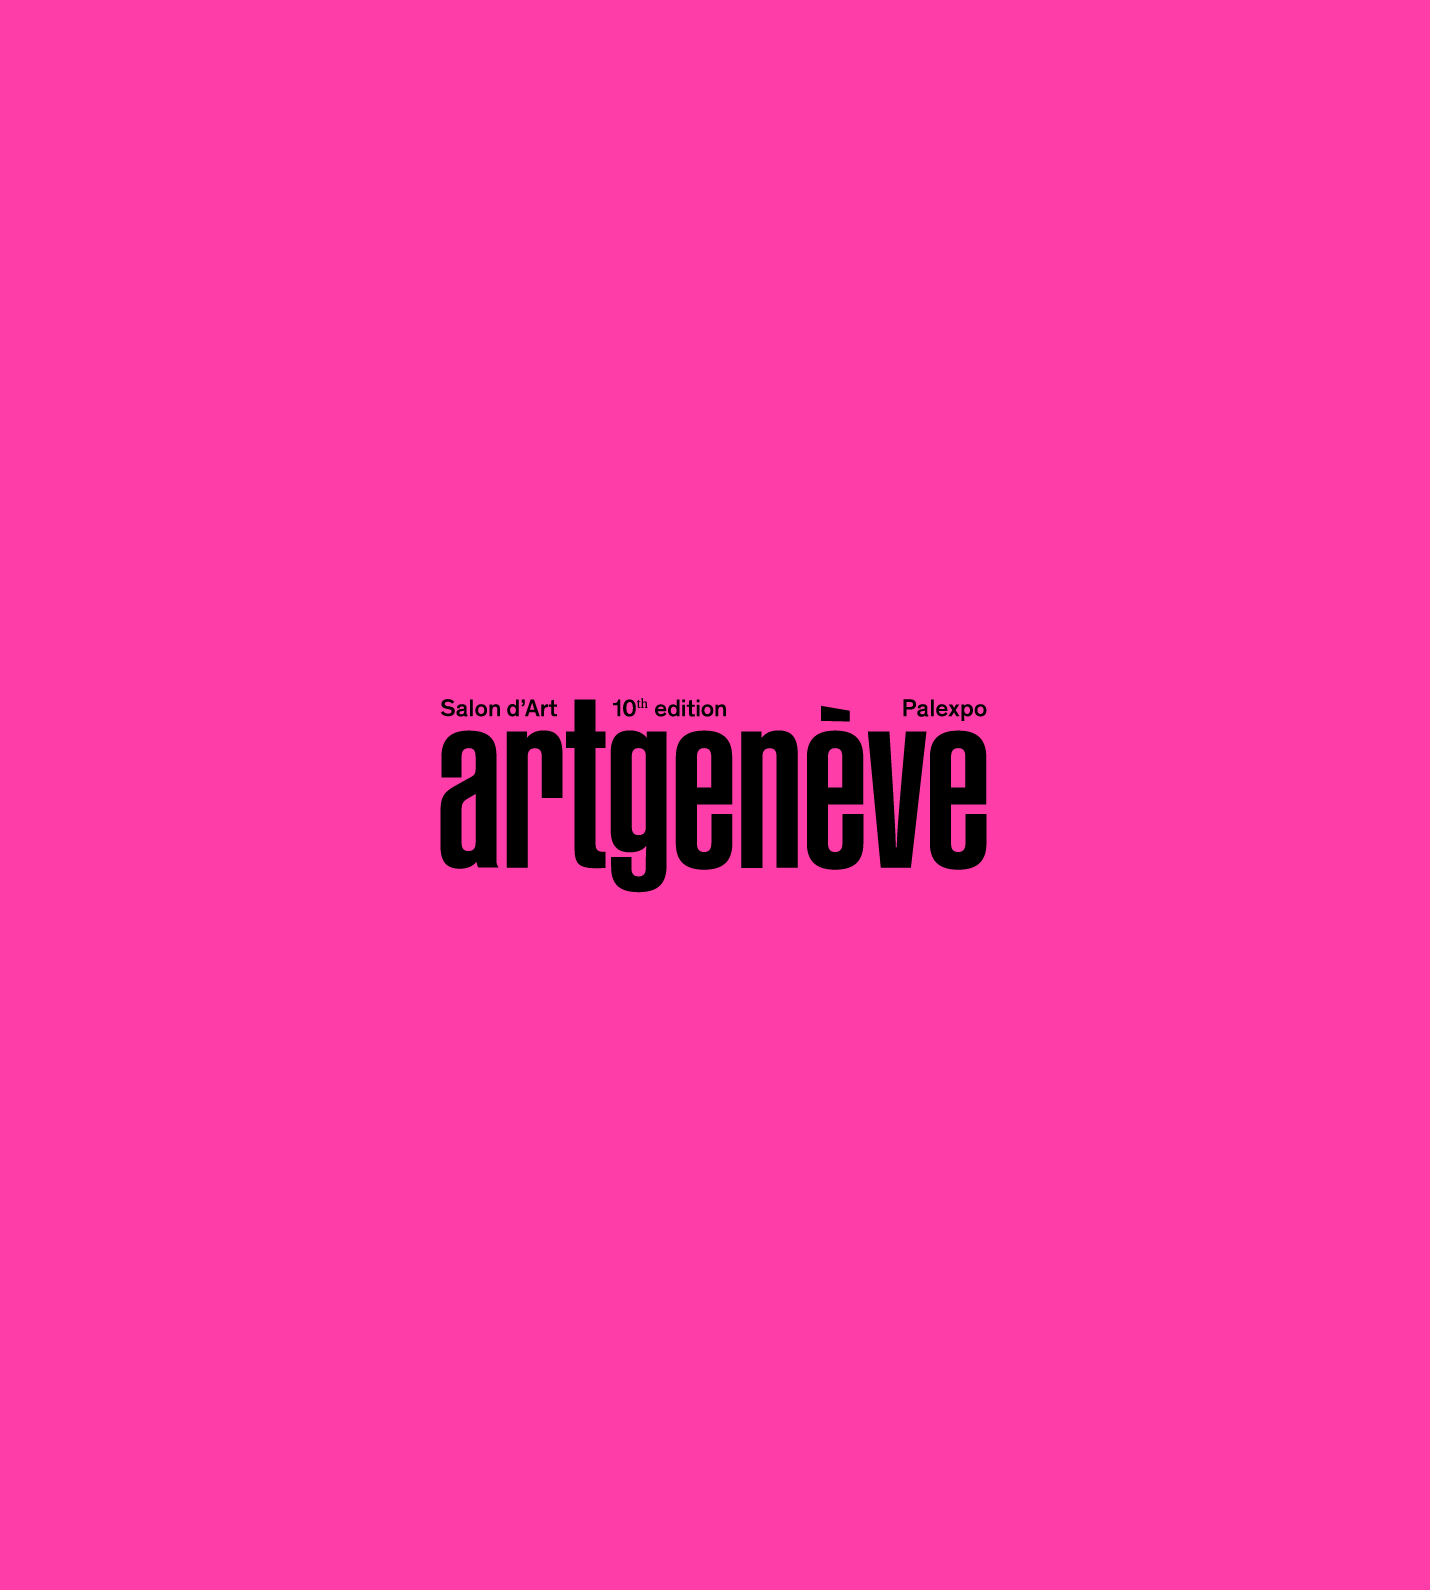 ACT 2022 launches at Art Genève — 10th Edition